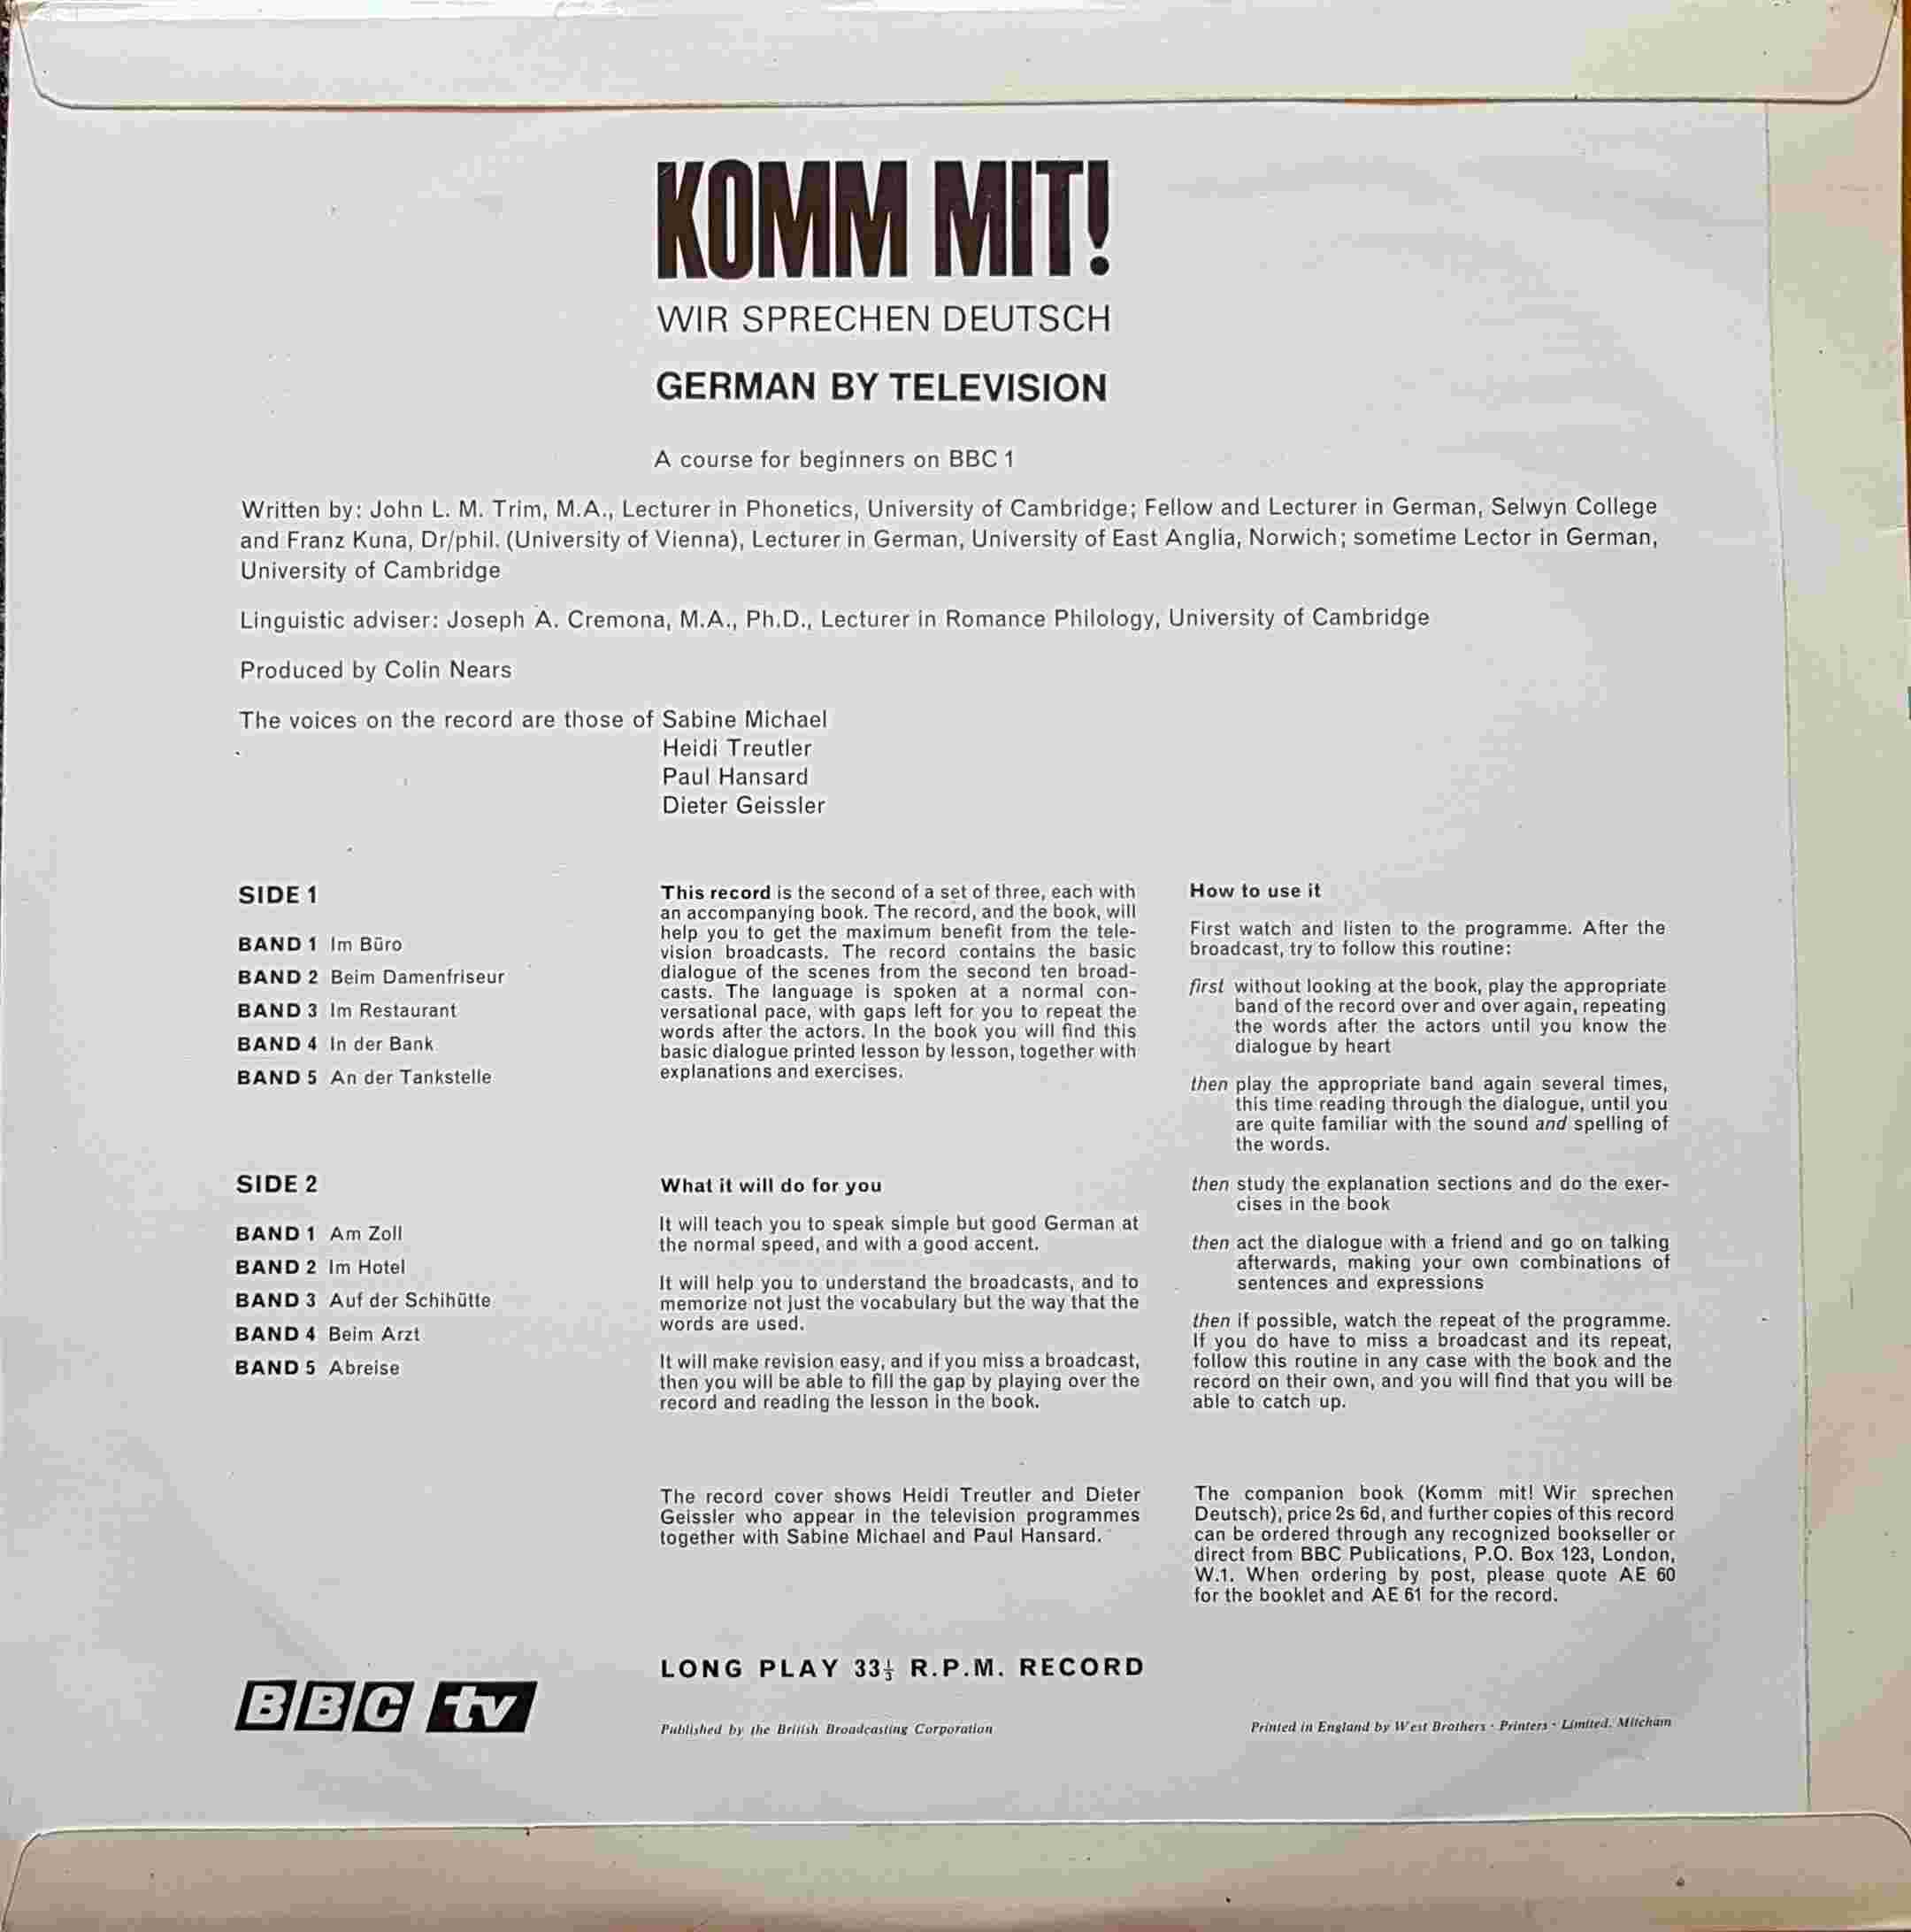 Picture of OP 11/12 Komm mit! Wir sprechen Deutsch - A BBC course for beginners lessons 11 - 20 by artist John L. M. Trim / Frank Kuna from the BBC records and Tapes library